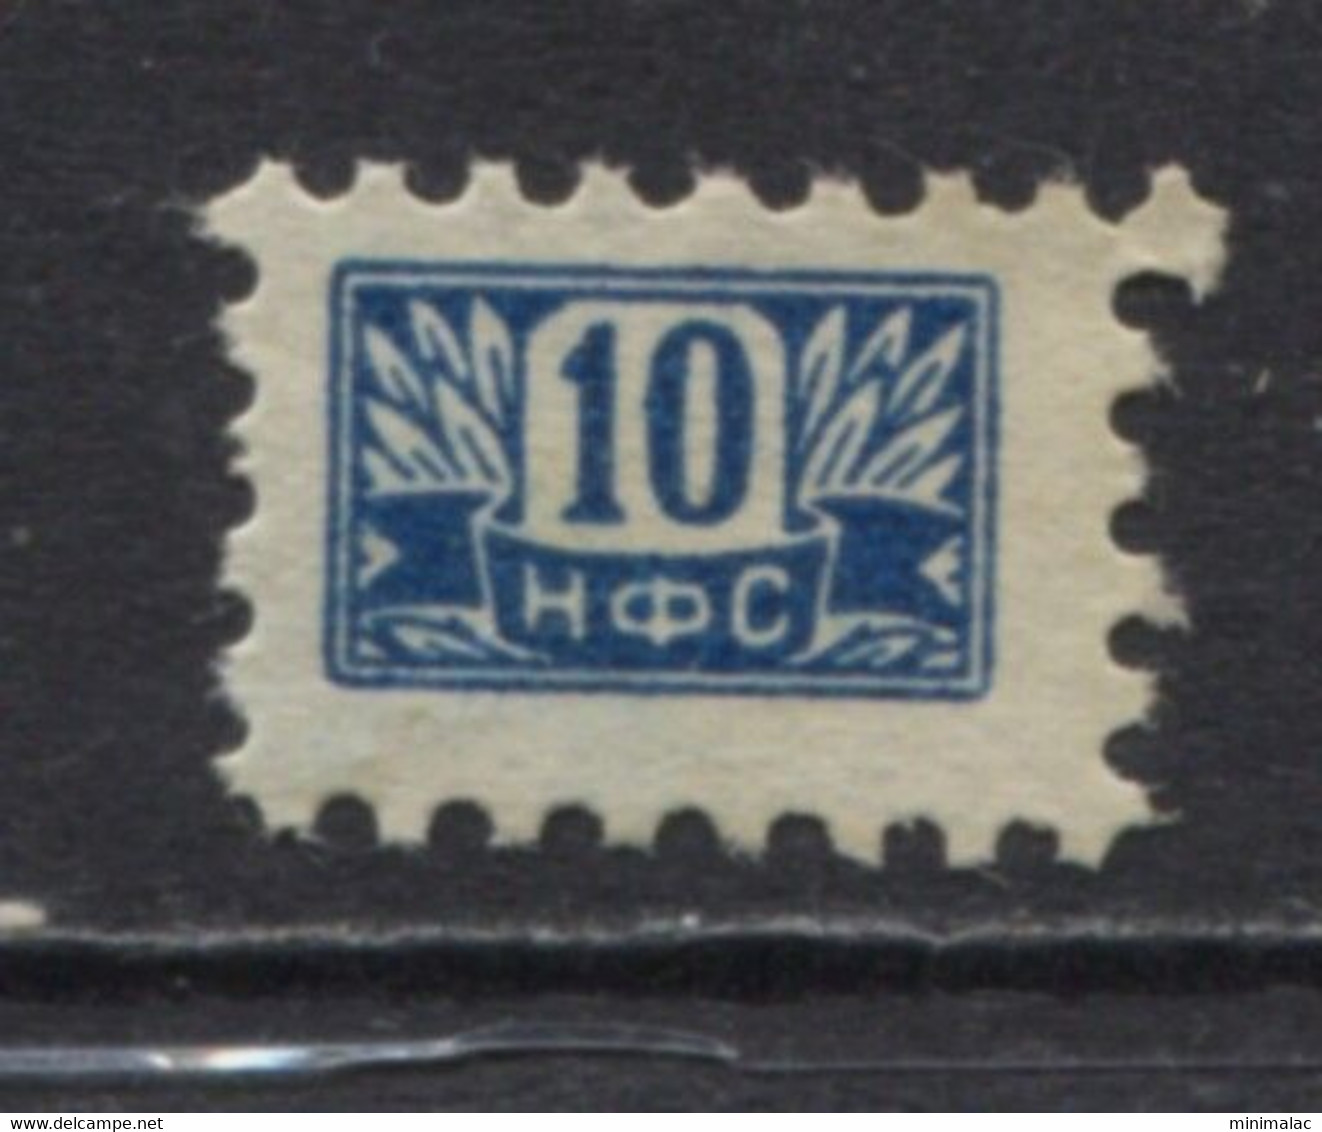 Yugoslavia 1952, Stamp For Membership, NFS, Labor Union, Administrative Stamp - Revenue, Tax Stamp, 10d - Oficiales